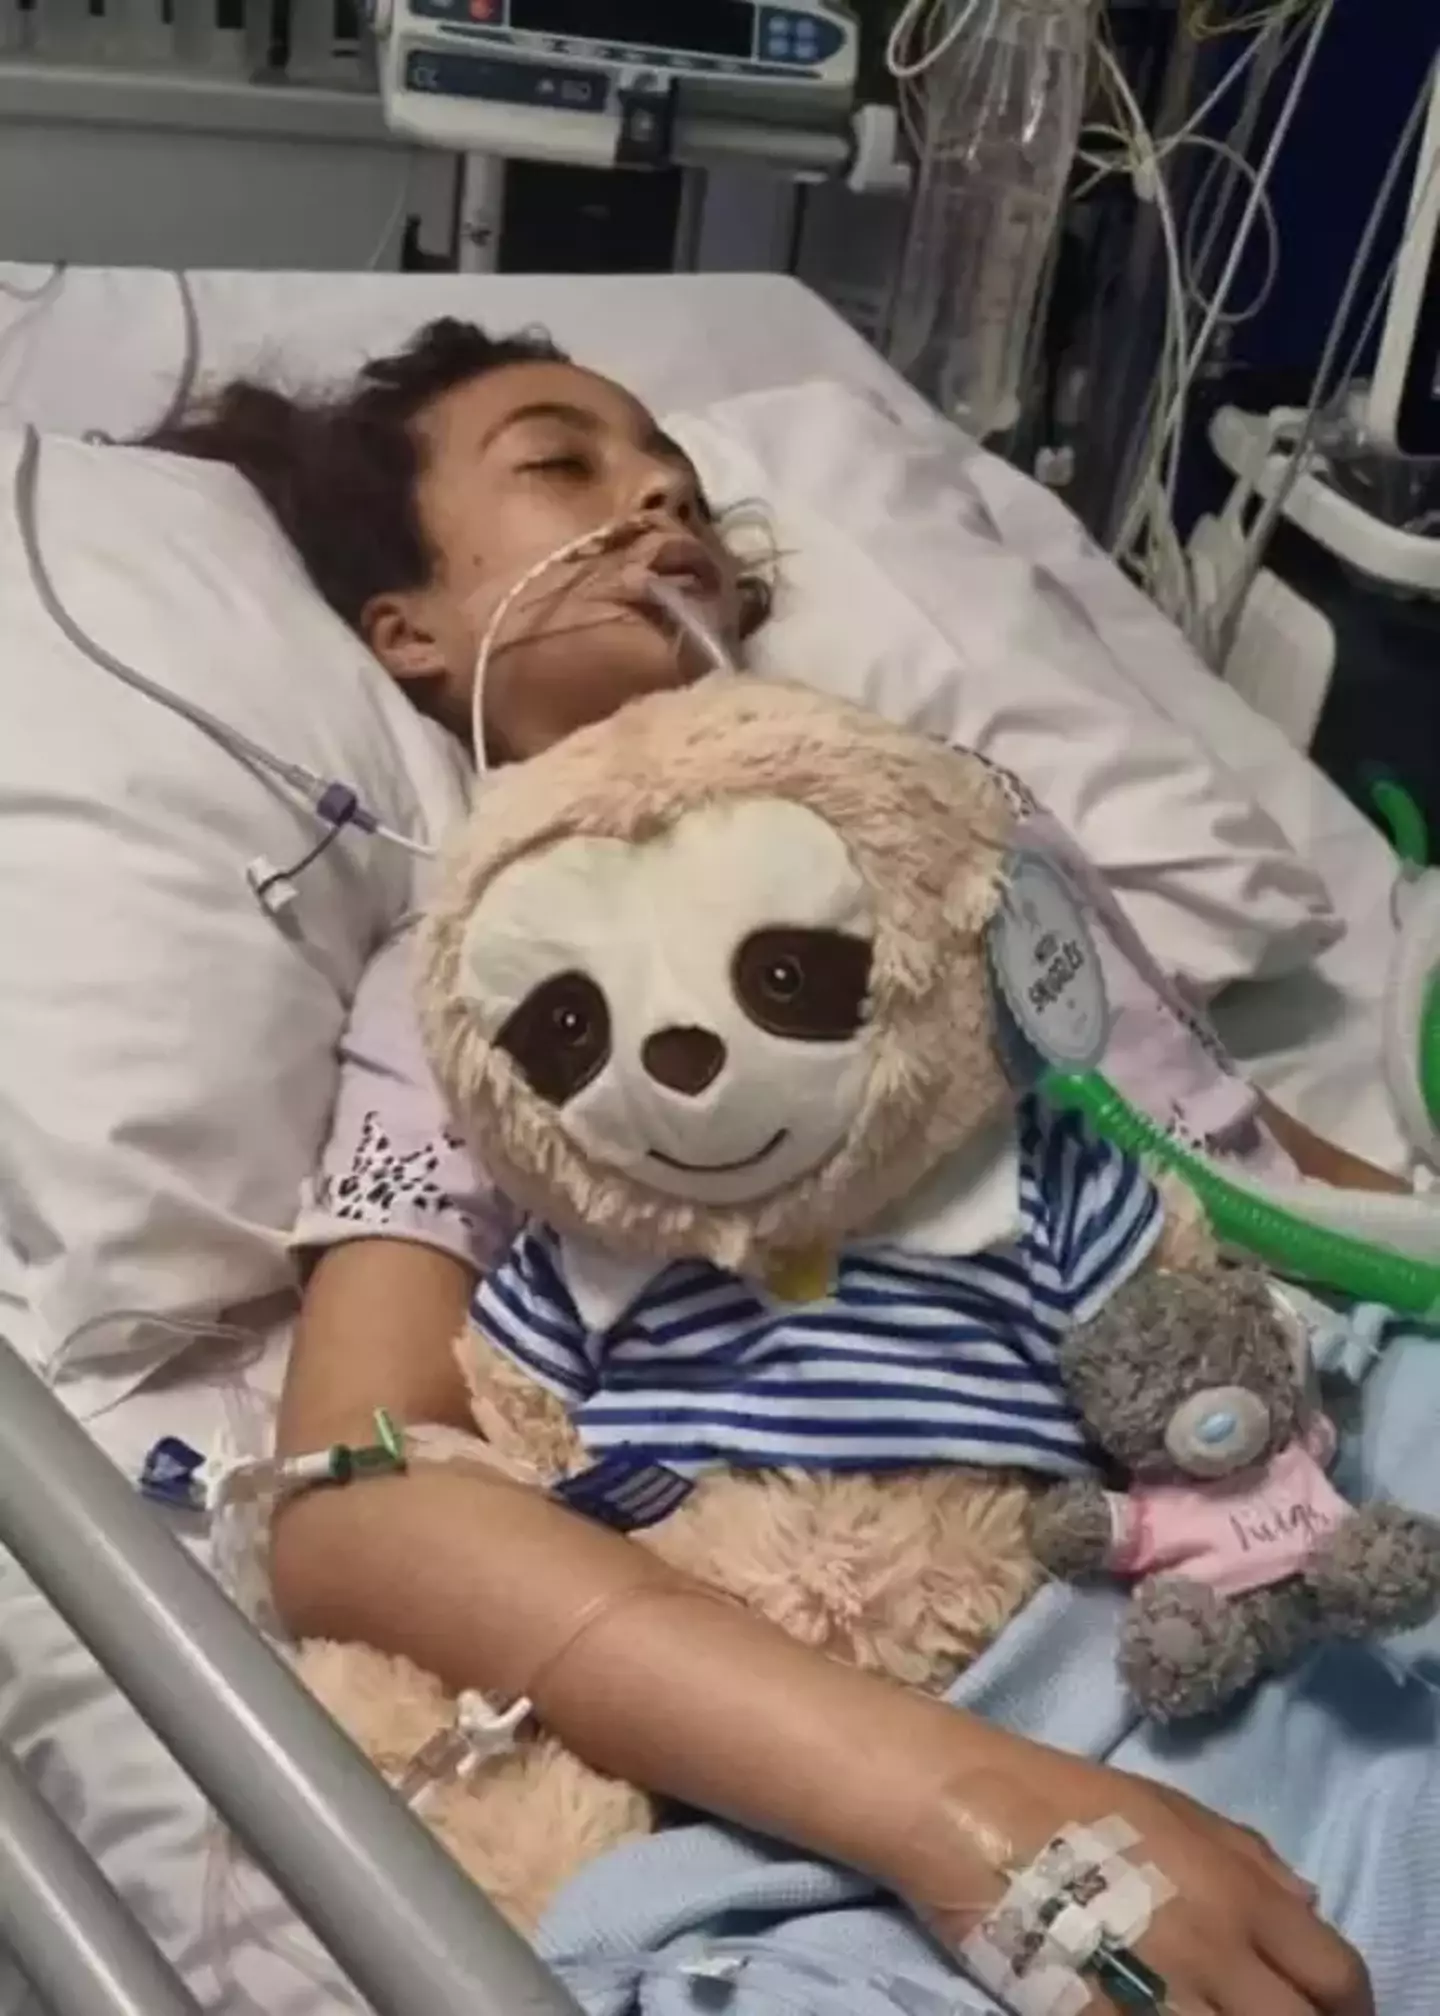 Sarah was placed in an induced coma after being rushed to hospital.